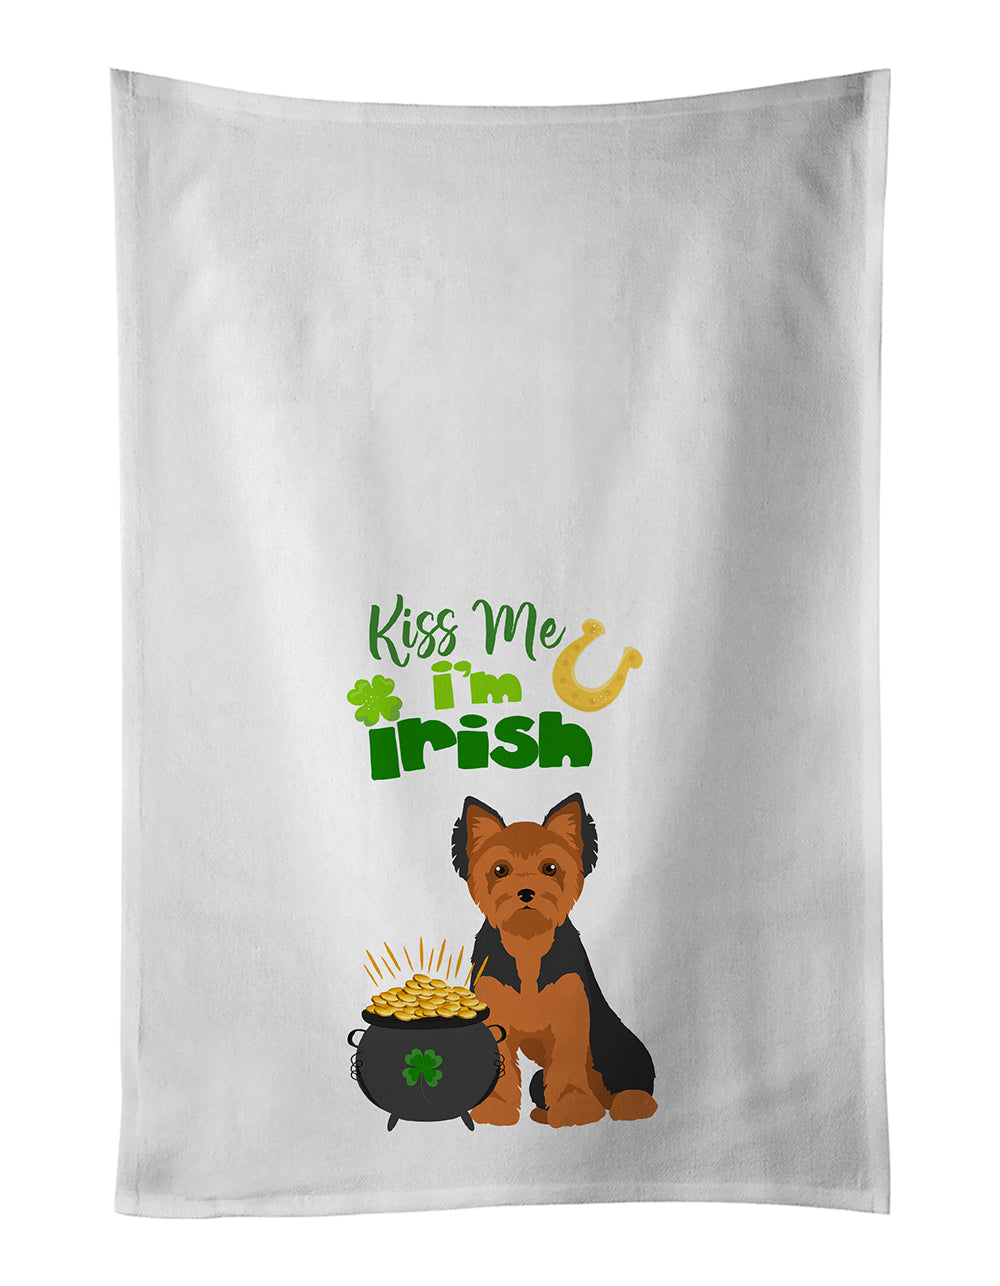 Buy this Black and Tan Puppy Cut Yorkshire Terrier St. Patrick's Day White Kitchen Towel Set of 2 Dish Towels